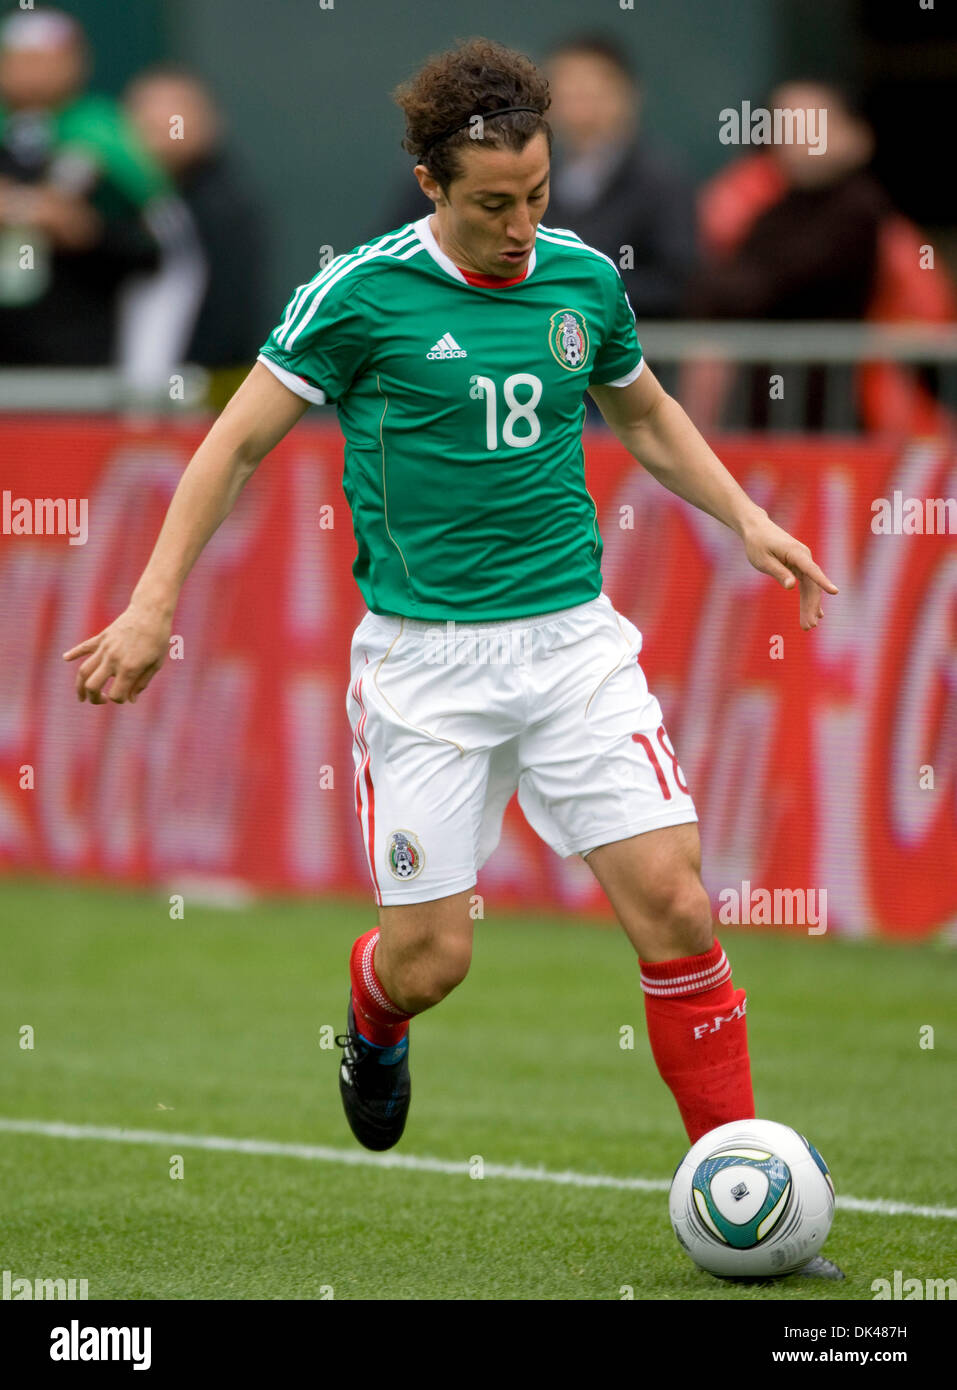 Mar. 26, 2011 - Oakland, California, U.S. - Midfielder ANDRES GUARDADO #18 during play action at the FIFA friendly match between Mexico and Paraguay. (Credit Image: © William Mancebo/ZUMAPRESS.com) Stock Photo